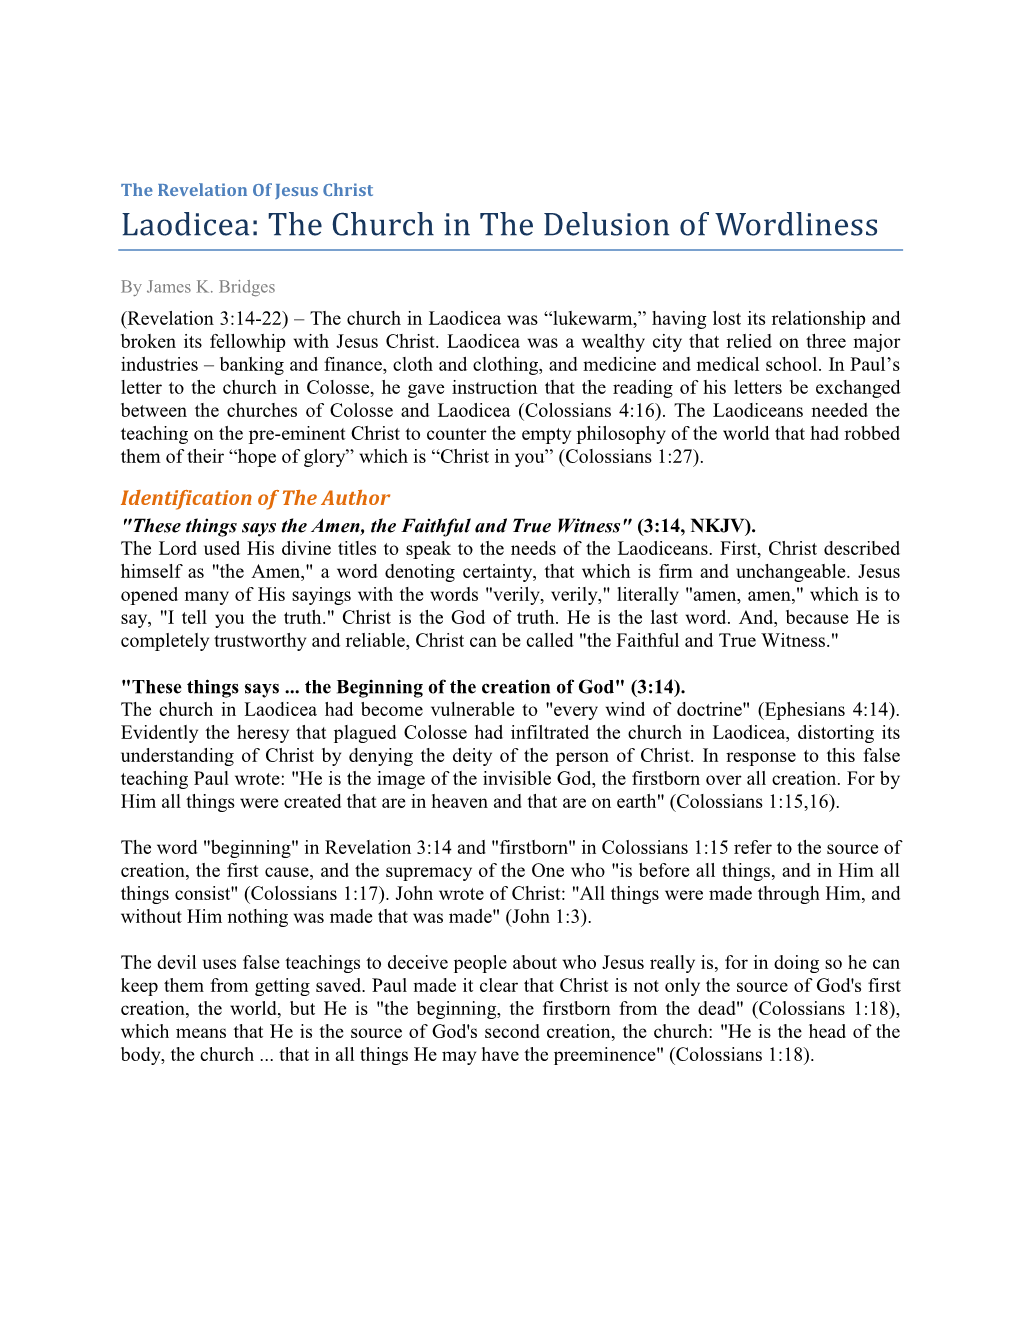 Laodicea: the Church in the Delusion of Wordliness